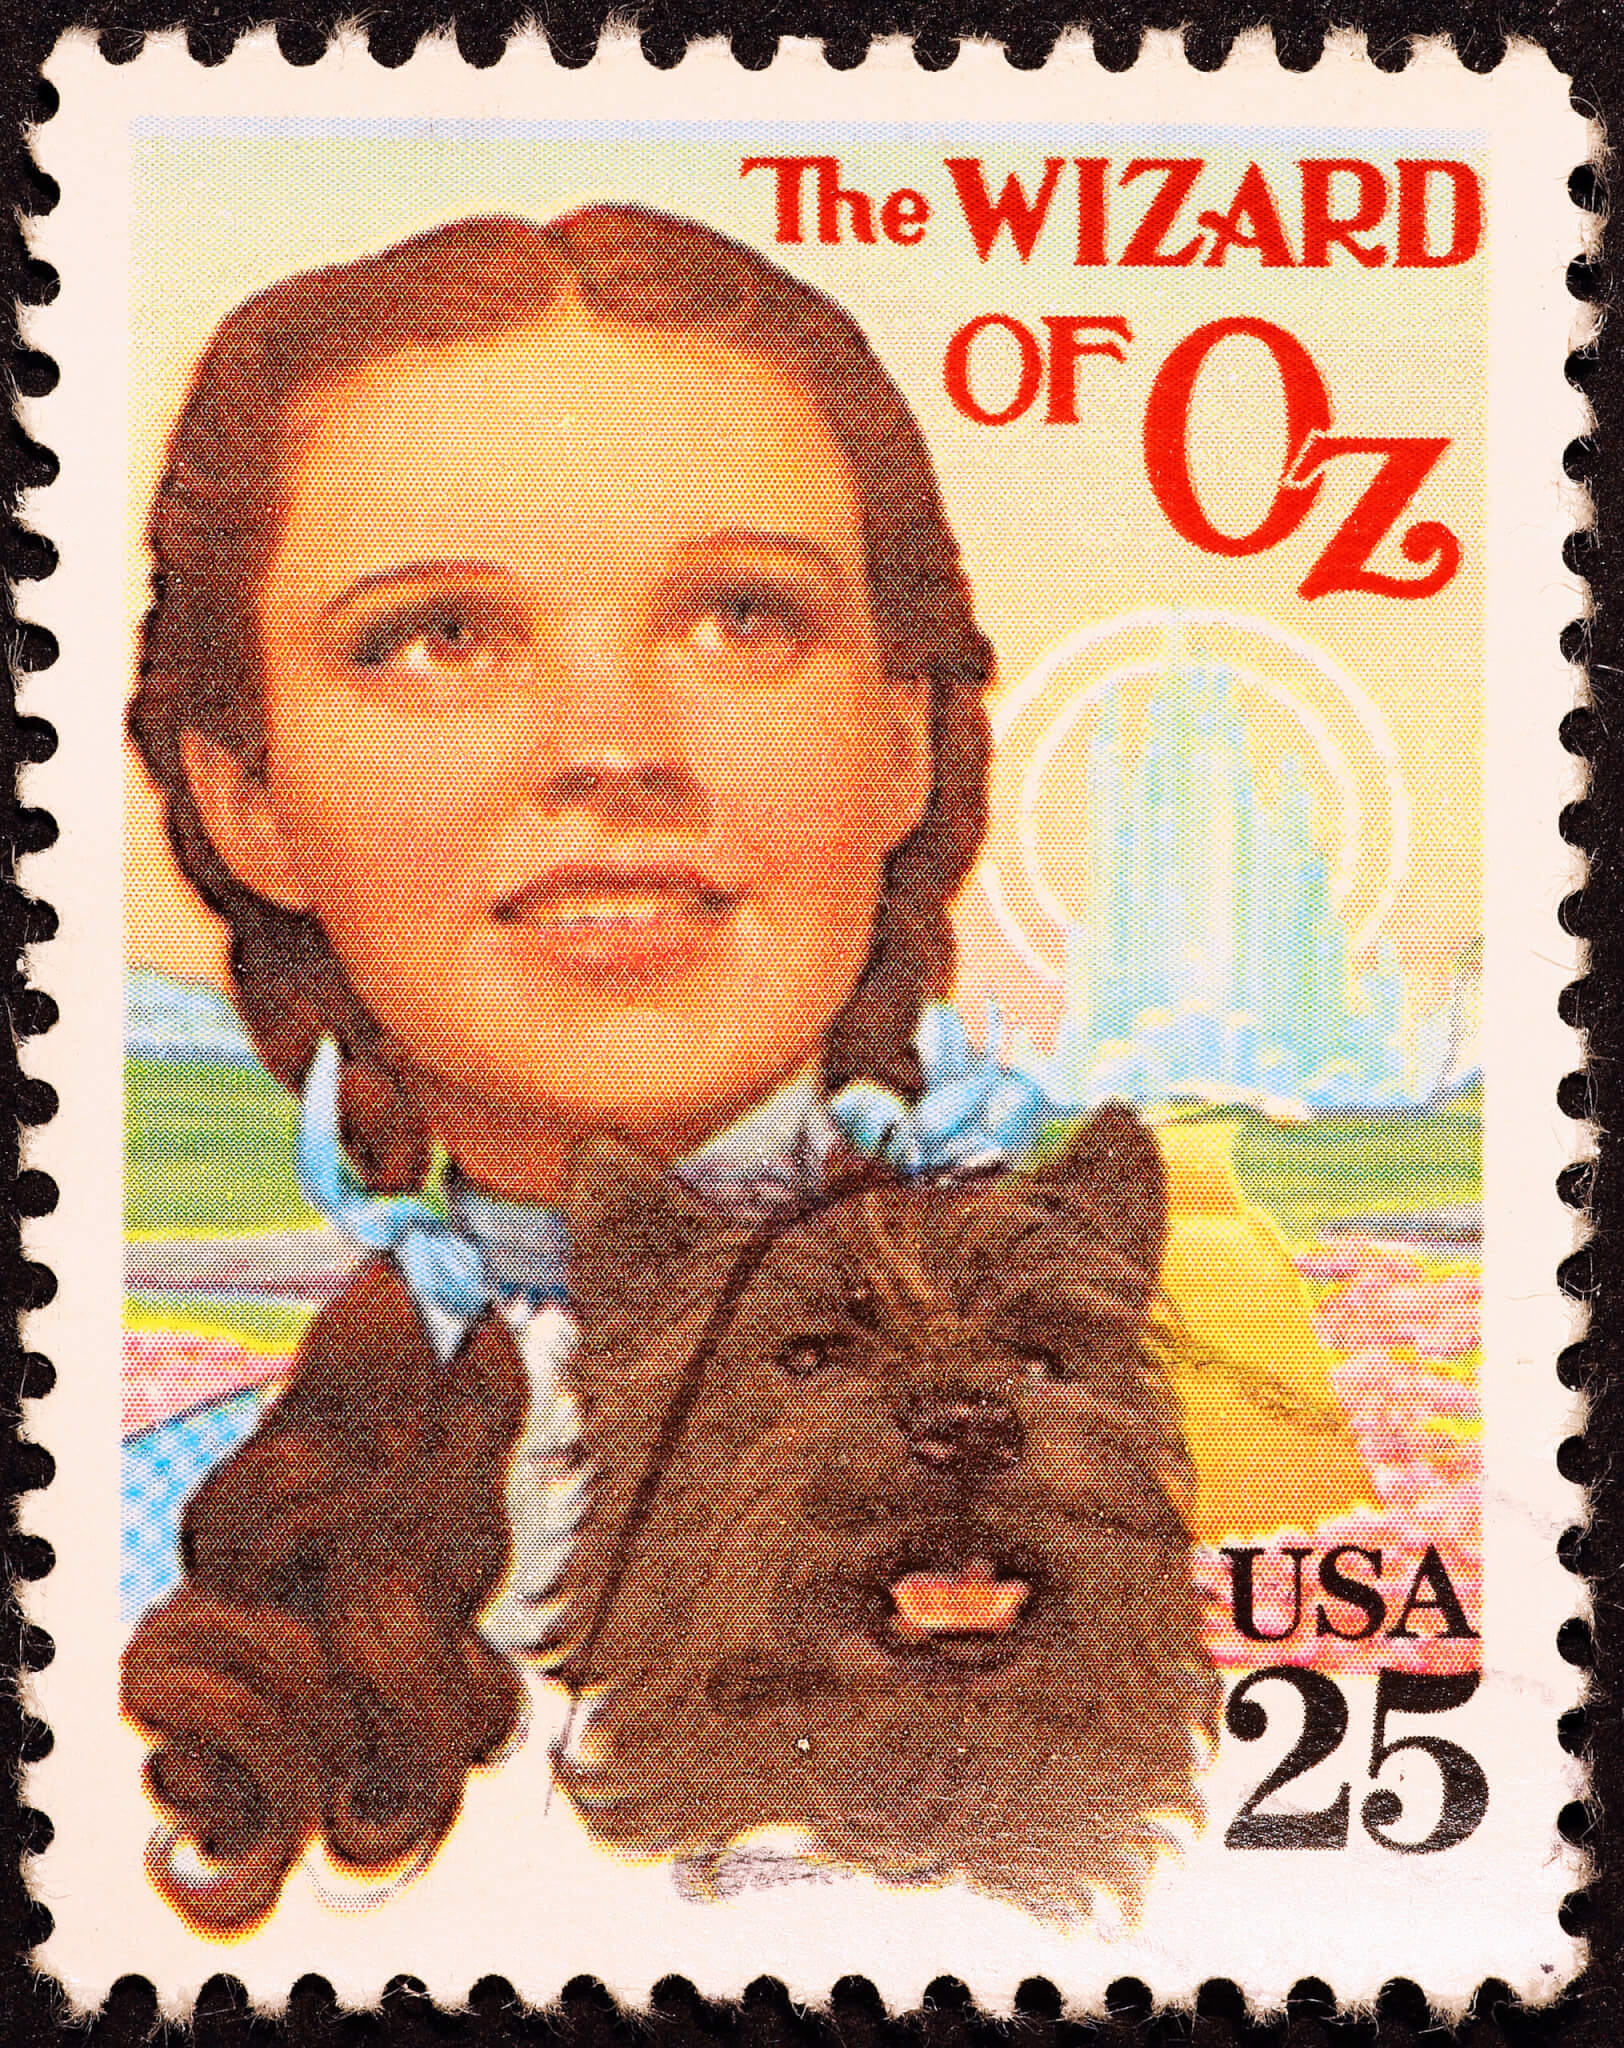 A "Wizard of Oz" stamp with Dorothy and Toto